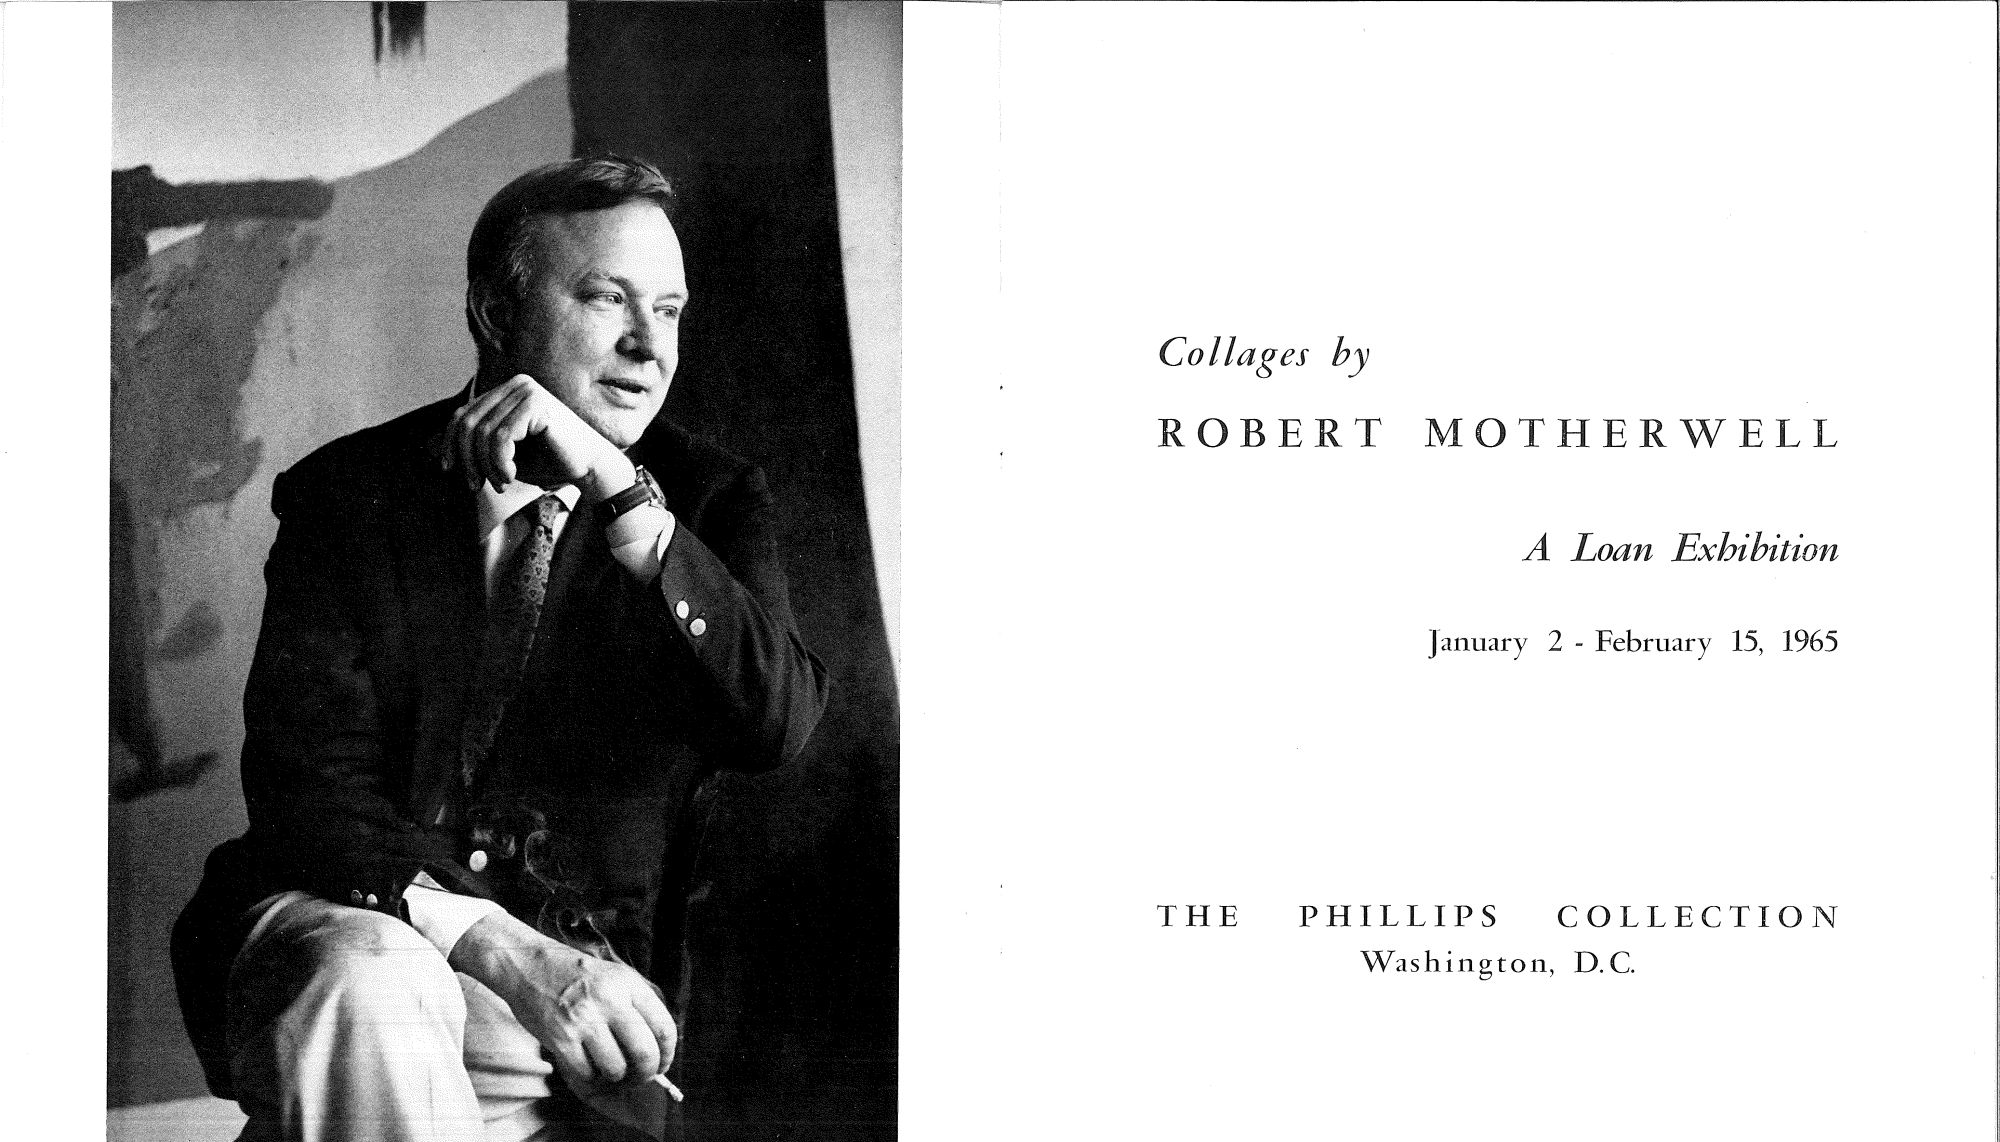 Title page of the catalogue for Collages by Robert Motherwell at the Phillips Collection, Washington, D.C.